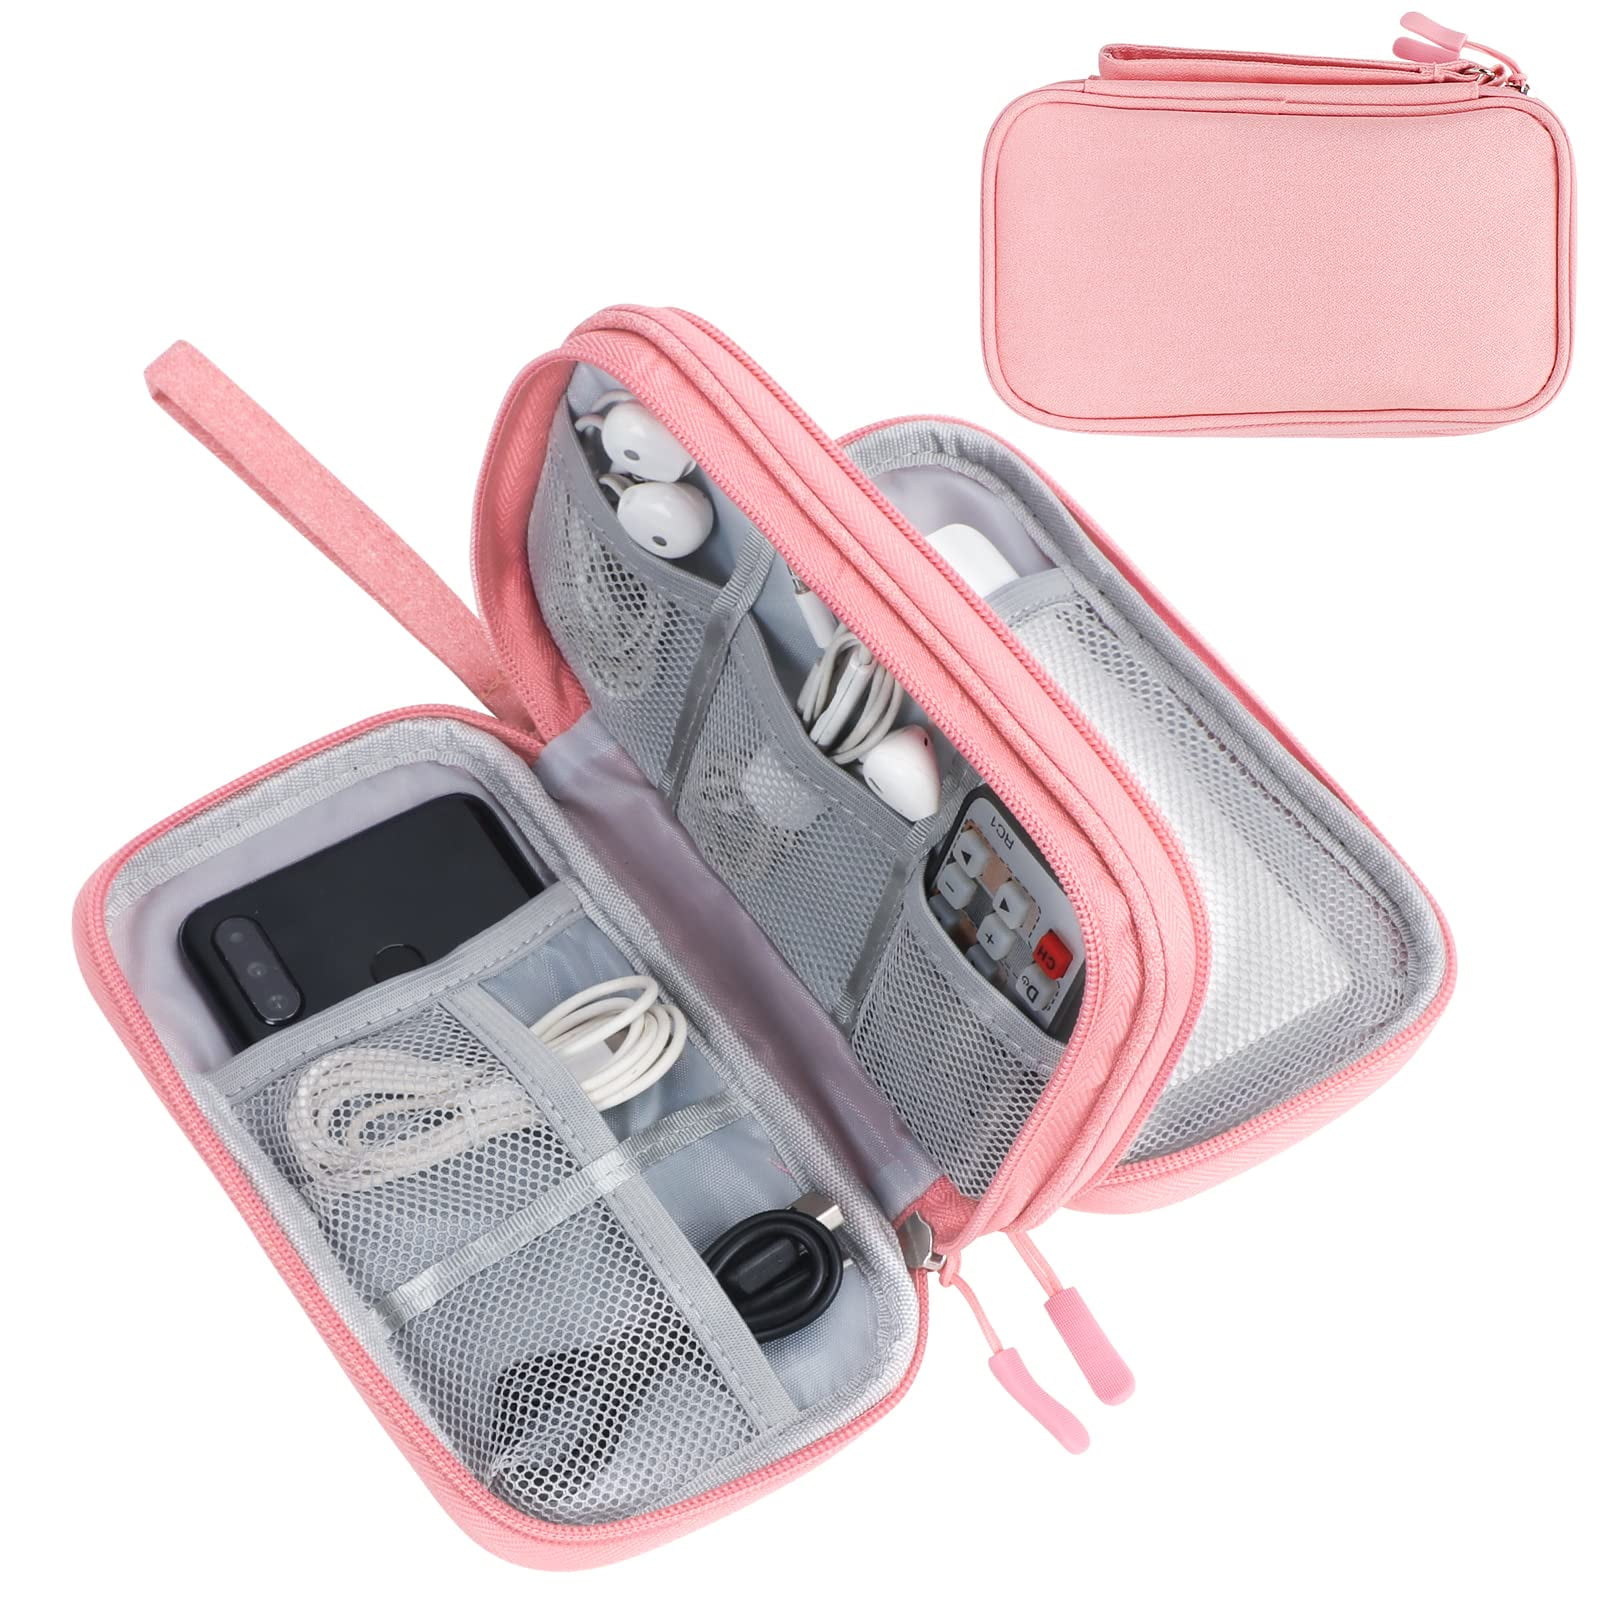  HESTECH Cable Organizer Charger Bag Travel Electronics